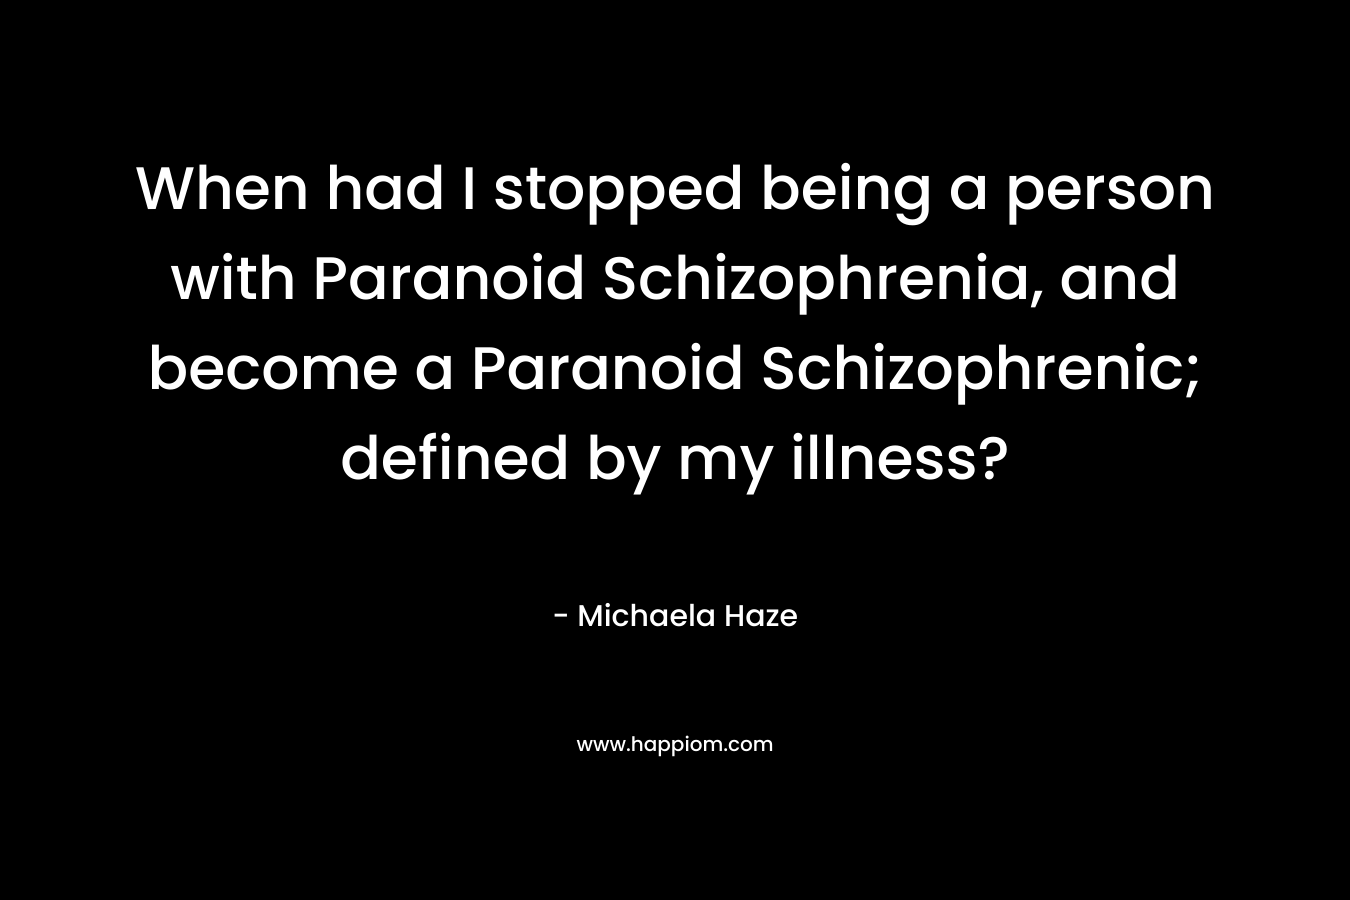 When had I stopped being a person with Paranoid Schizophrenia, and become a Paranoid Schizophrenic; defined by my illness? – Michaela Haze